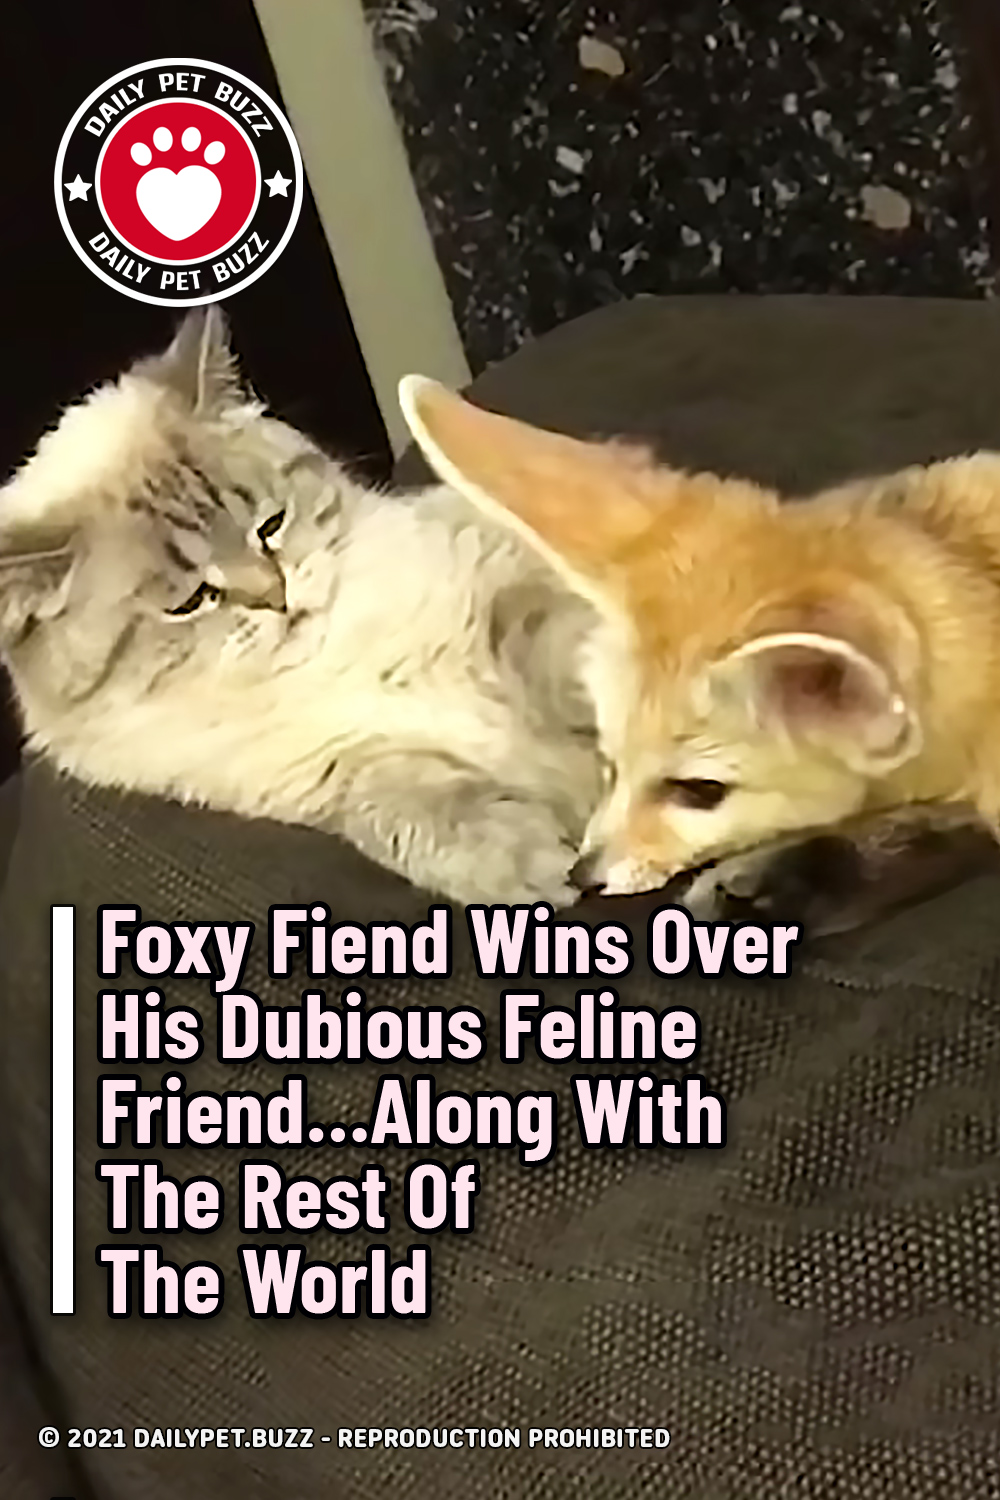 Foxy Fiend Wins Over His Dubious Feline Friend...Along With The Rest Of The World